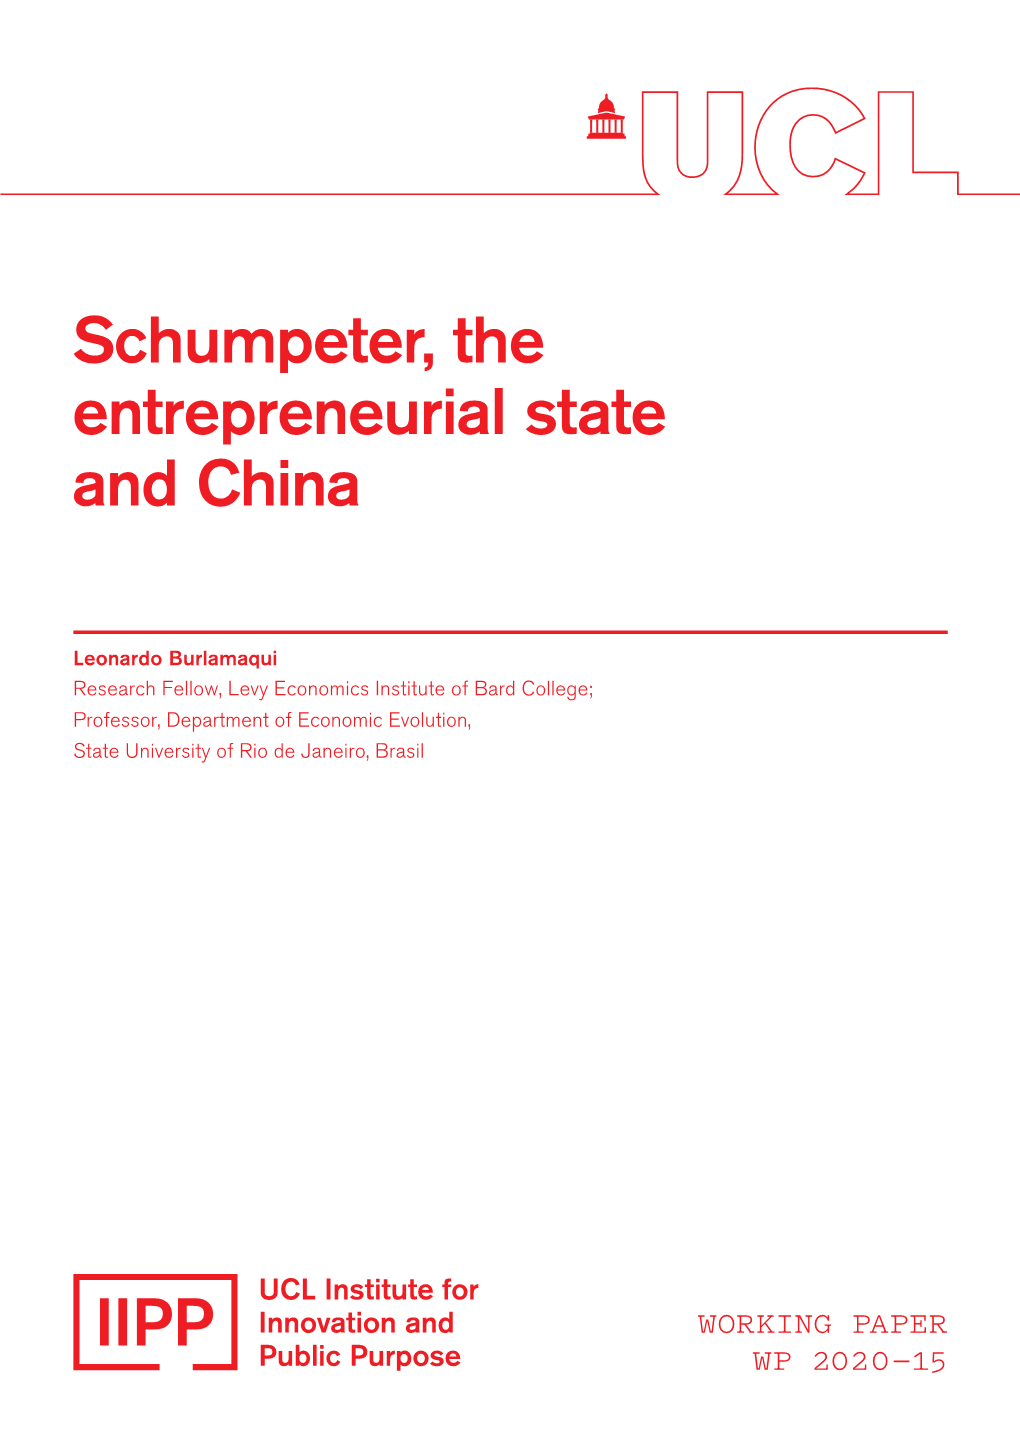 Schumpeter, the Entrepreneurial State and China